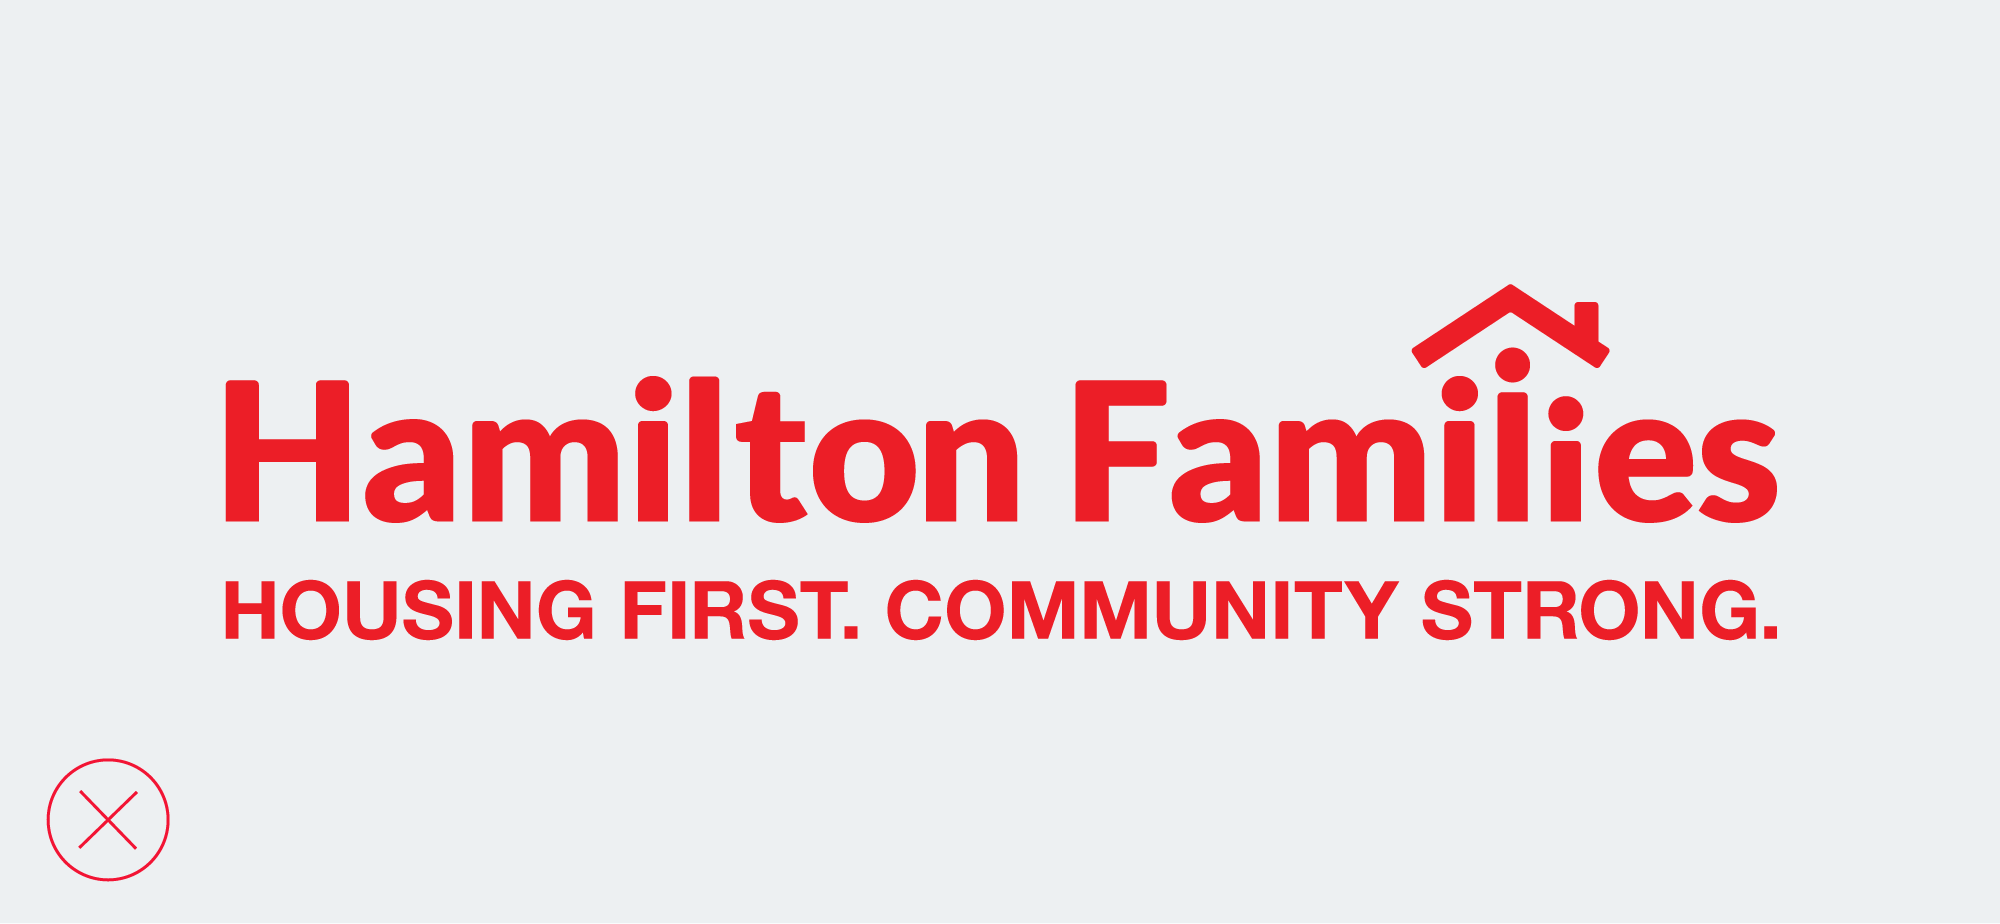 hamilton-families-brand-guidelines_logos-incorrect-usage-02.png